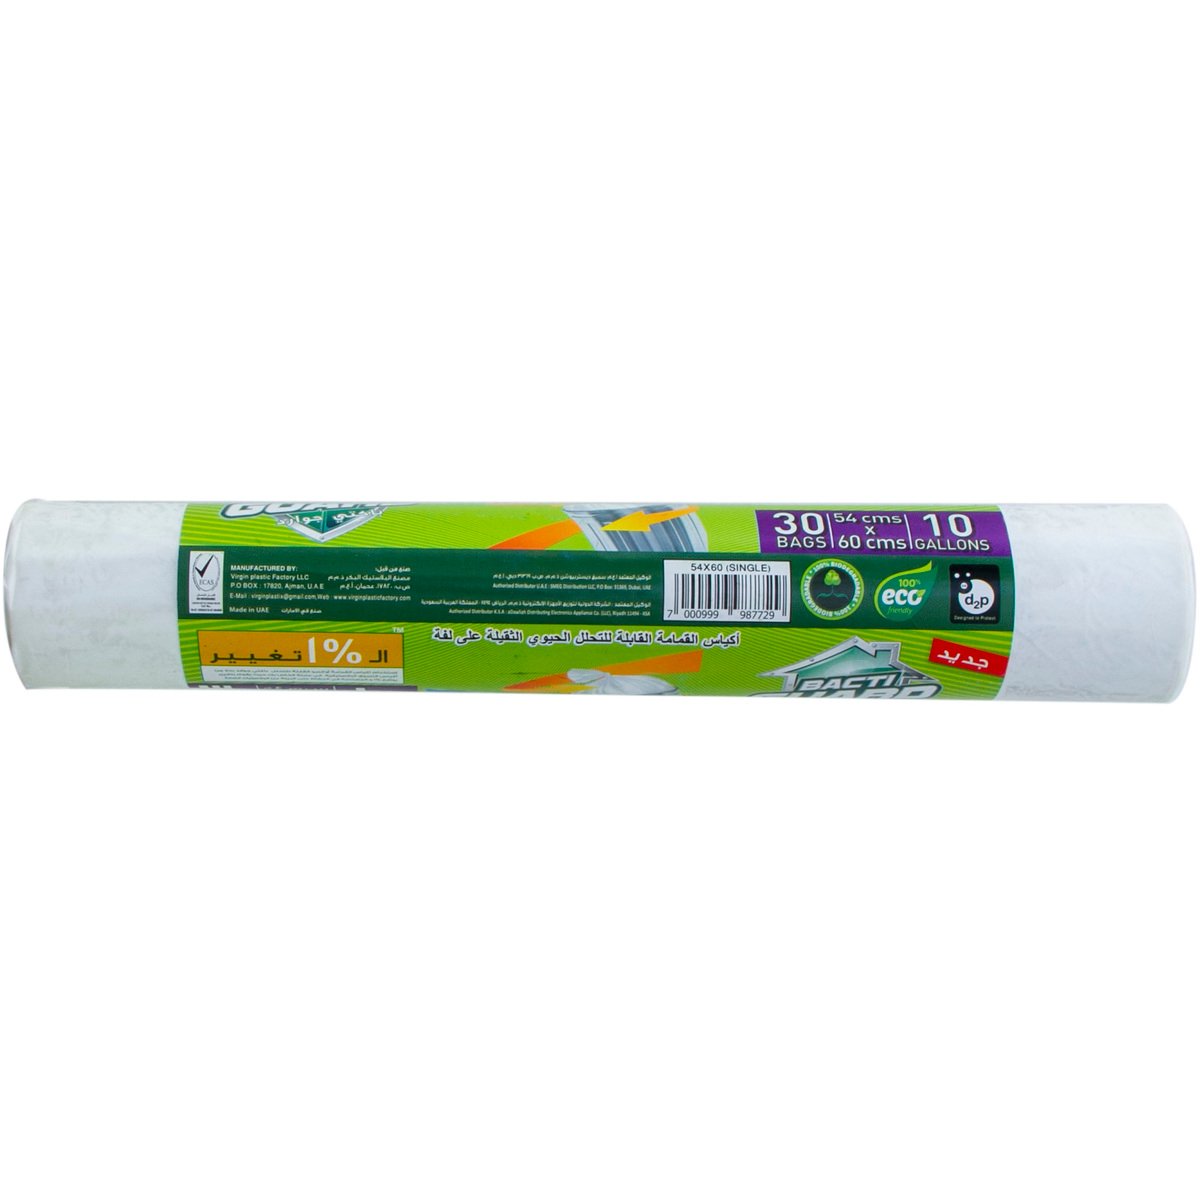 Bacti Guard Anti Bacterial Protection HD Biodegradable Garbage Bags 10 Gallons Size 54 x 60cm 30pcs